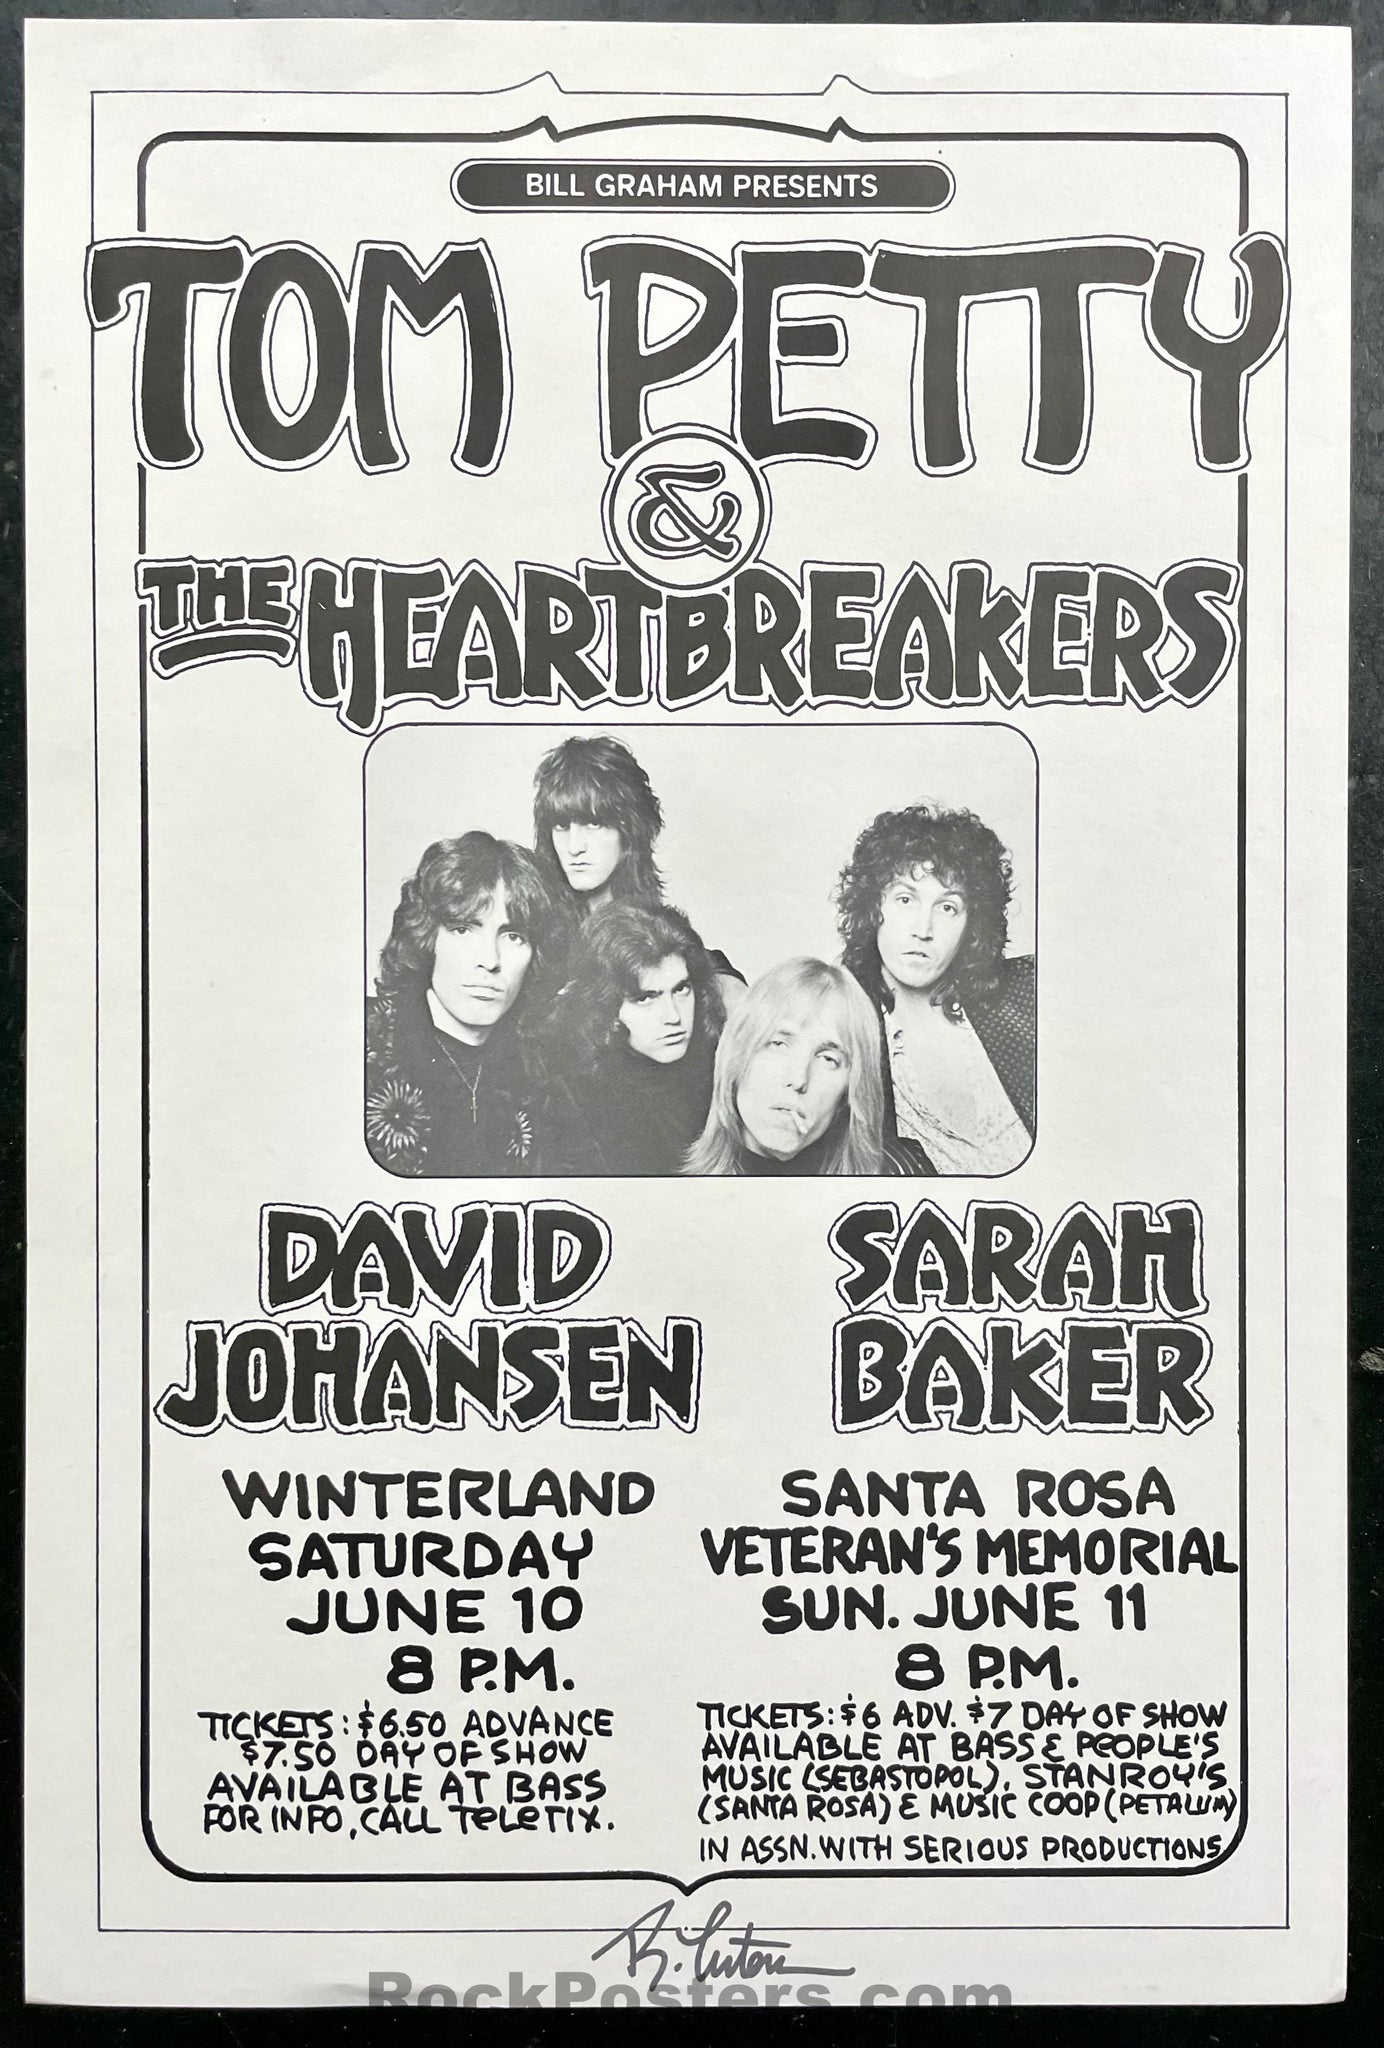 AUCTION - Tom Petty & Heartbreakers - Randy Tuten Signed - 1978 Poster - Winterland - Excellent